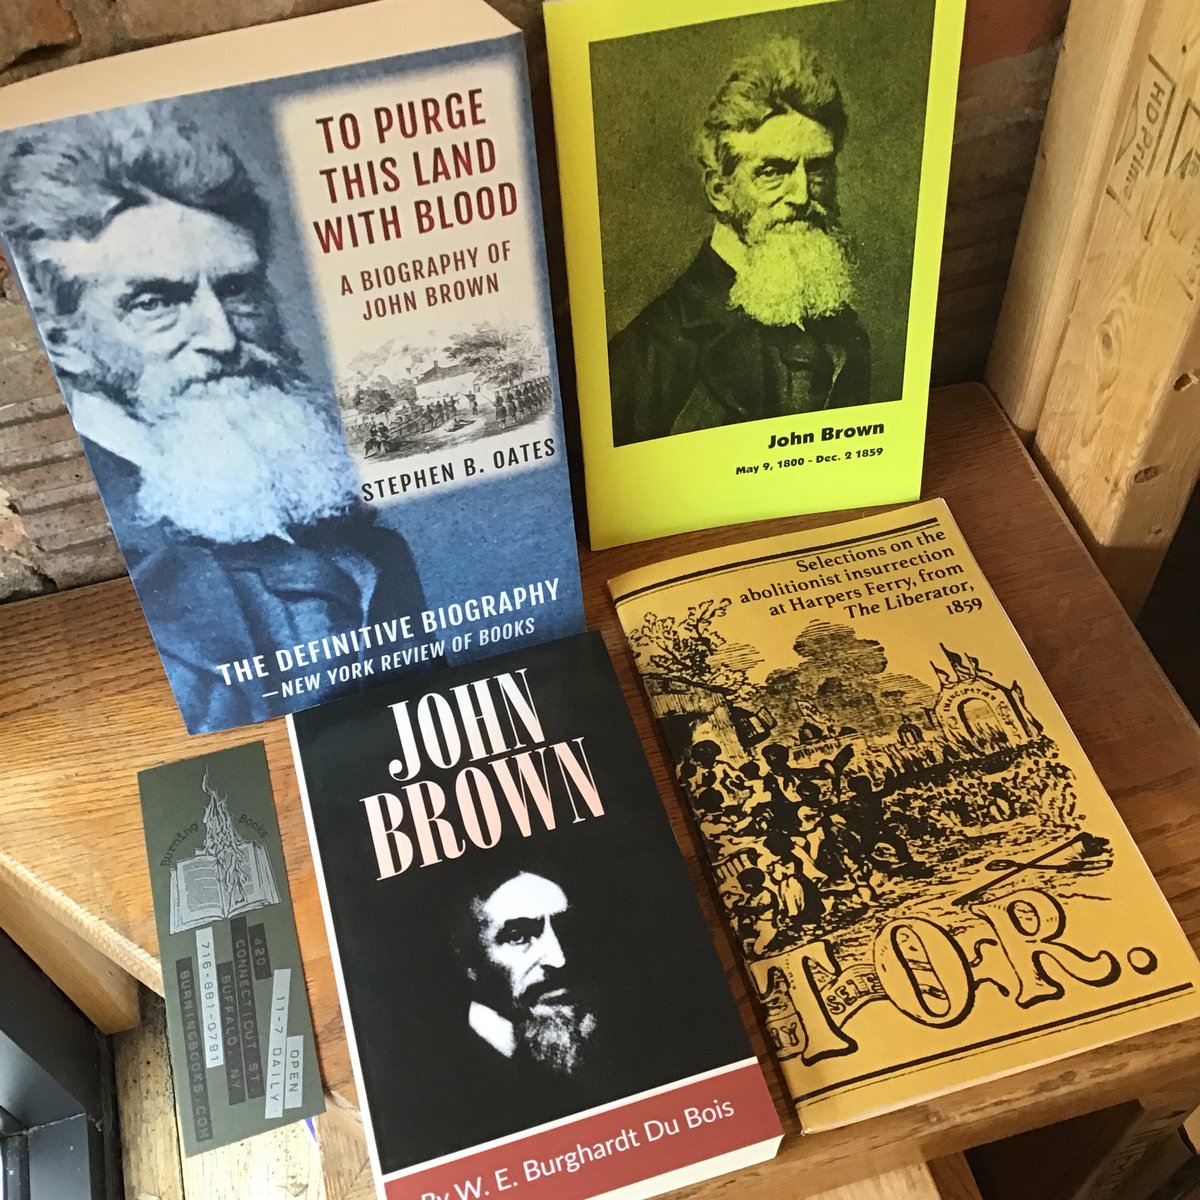 Just some good stuff on John Brown & the abolitionist insurrection at Harpers Ferry: burningbooks.com/products/selec… burningbooks.com/products/to-pu… burningbooks.com/products/john-… burningbooks.com/products/john-…